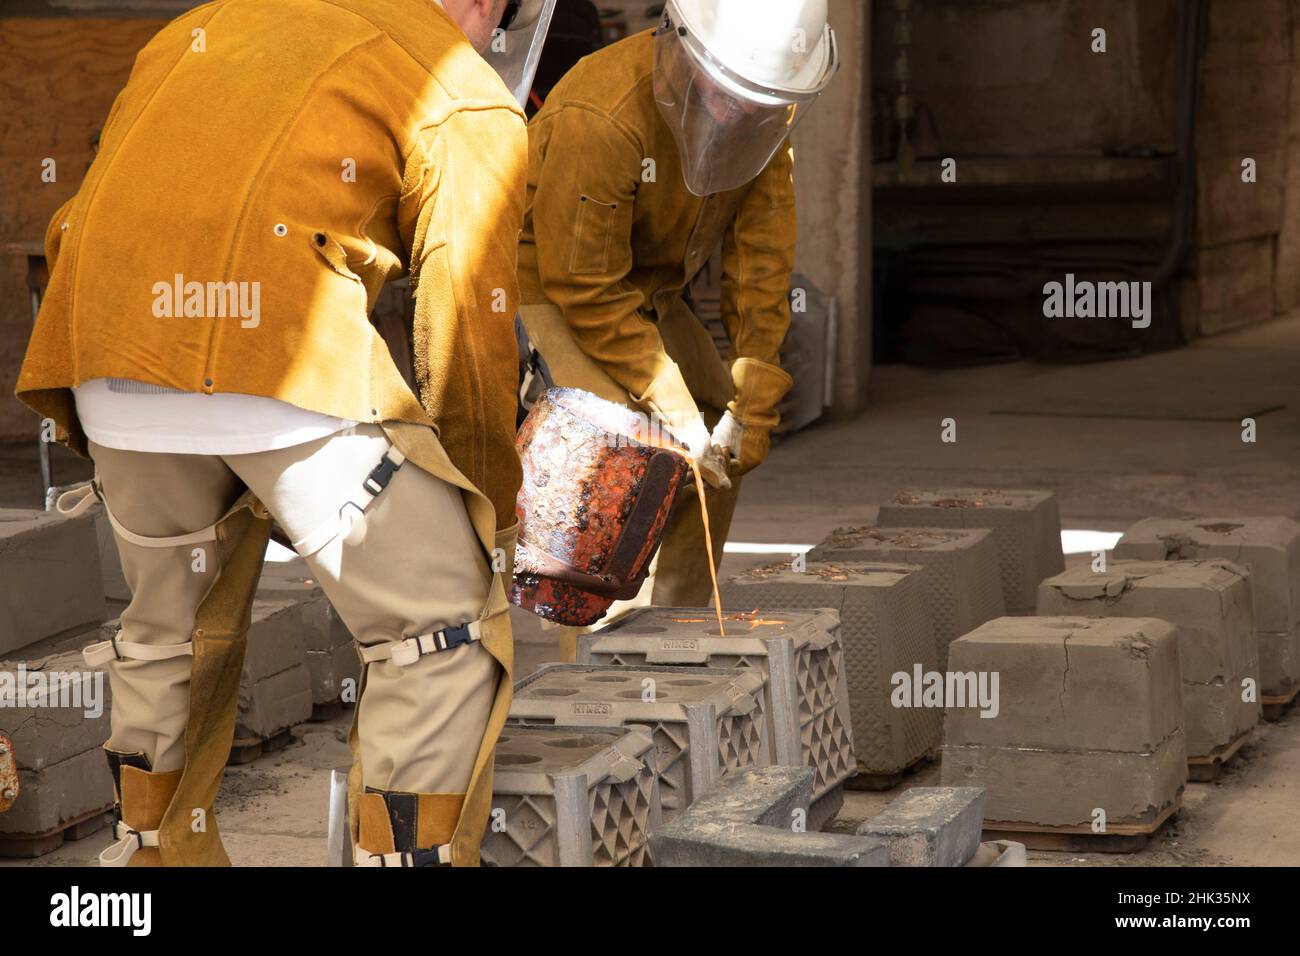 USA, Arizona, Scottsdale. Windbell casters pouring molten bronze into bell molds. Stock Photo